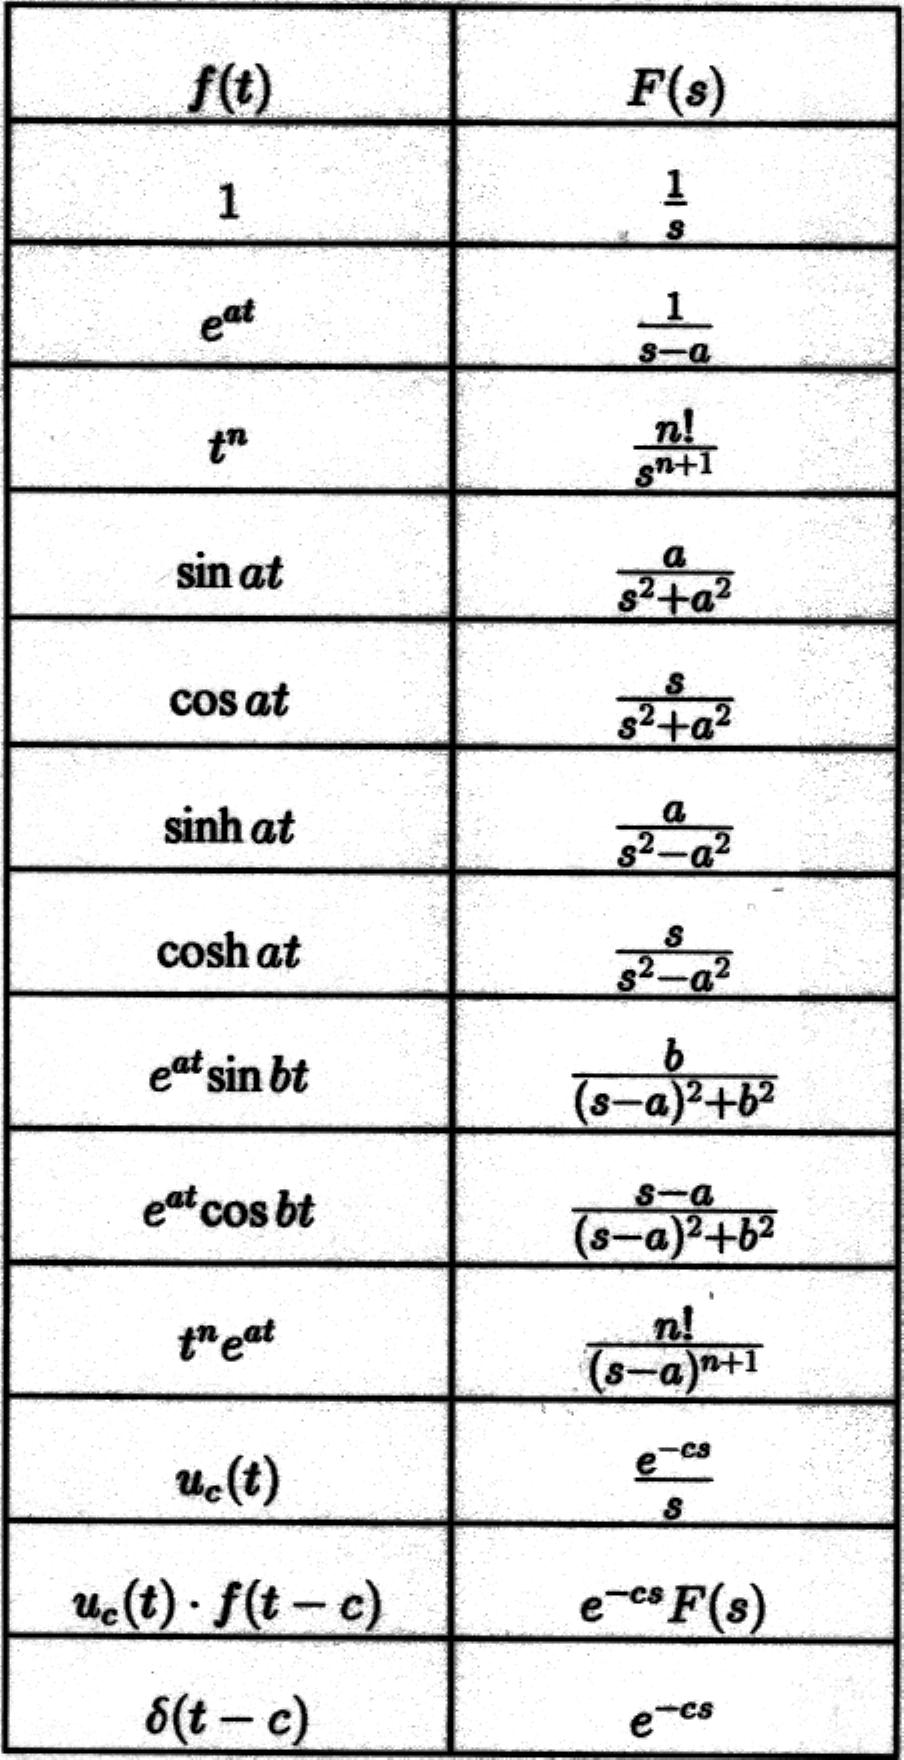 You may refer to the following table during the exam. Table of Laolace Transforms (!l F(s).! --'- eat -L.-0.